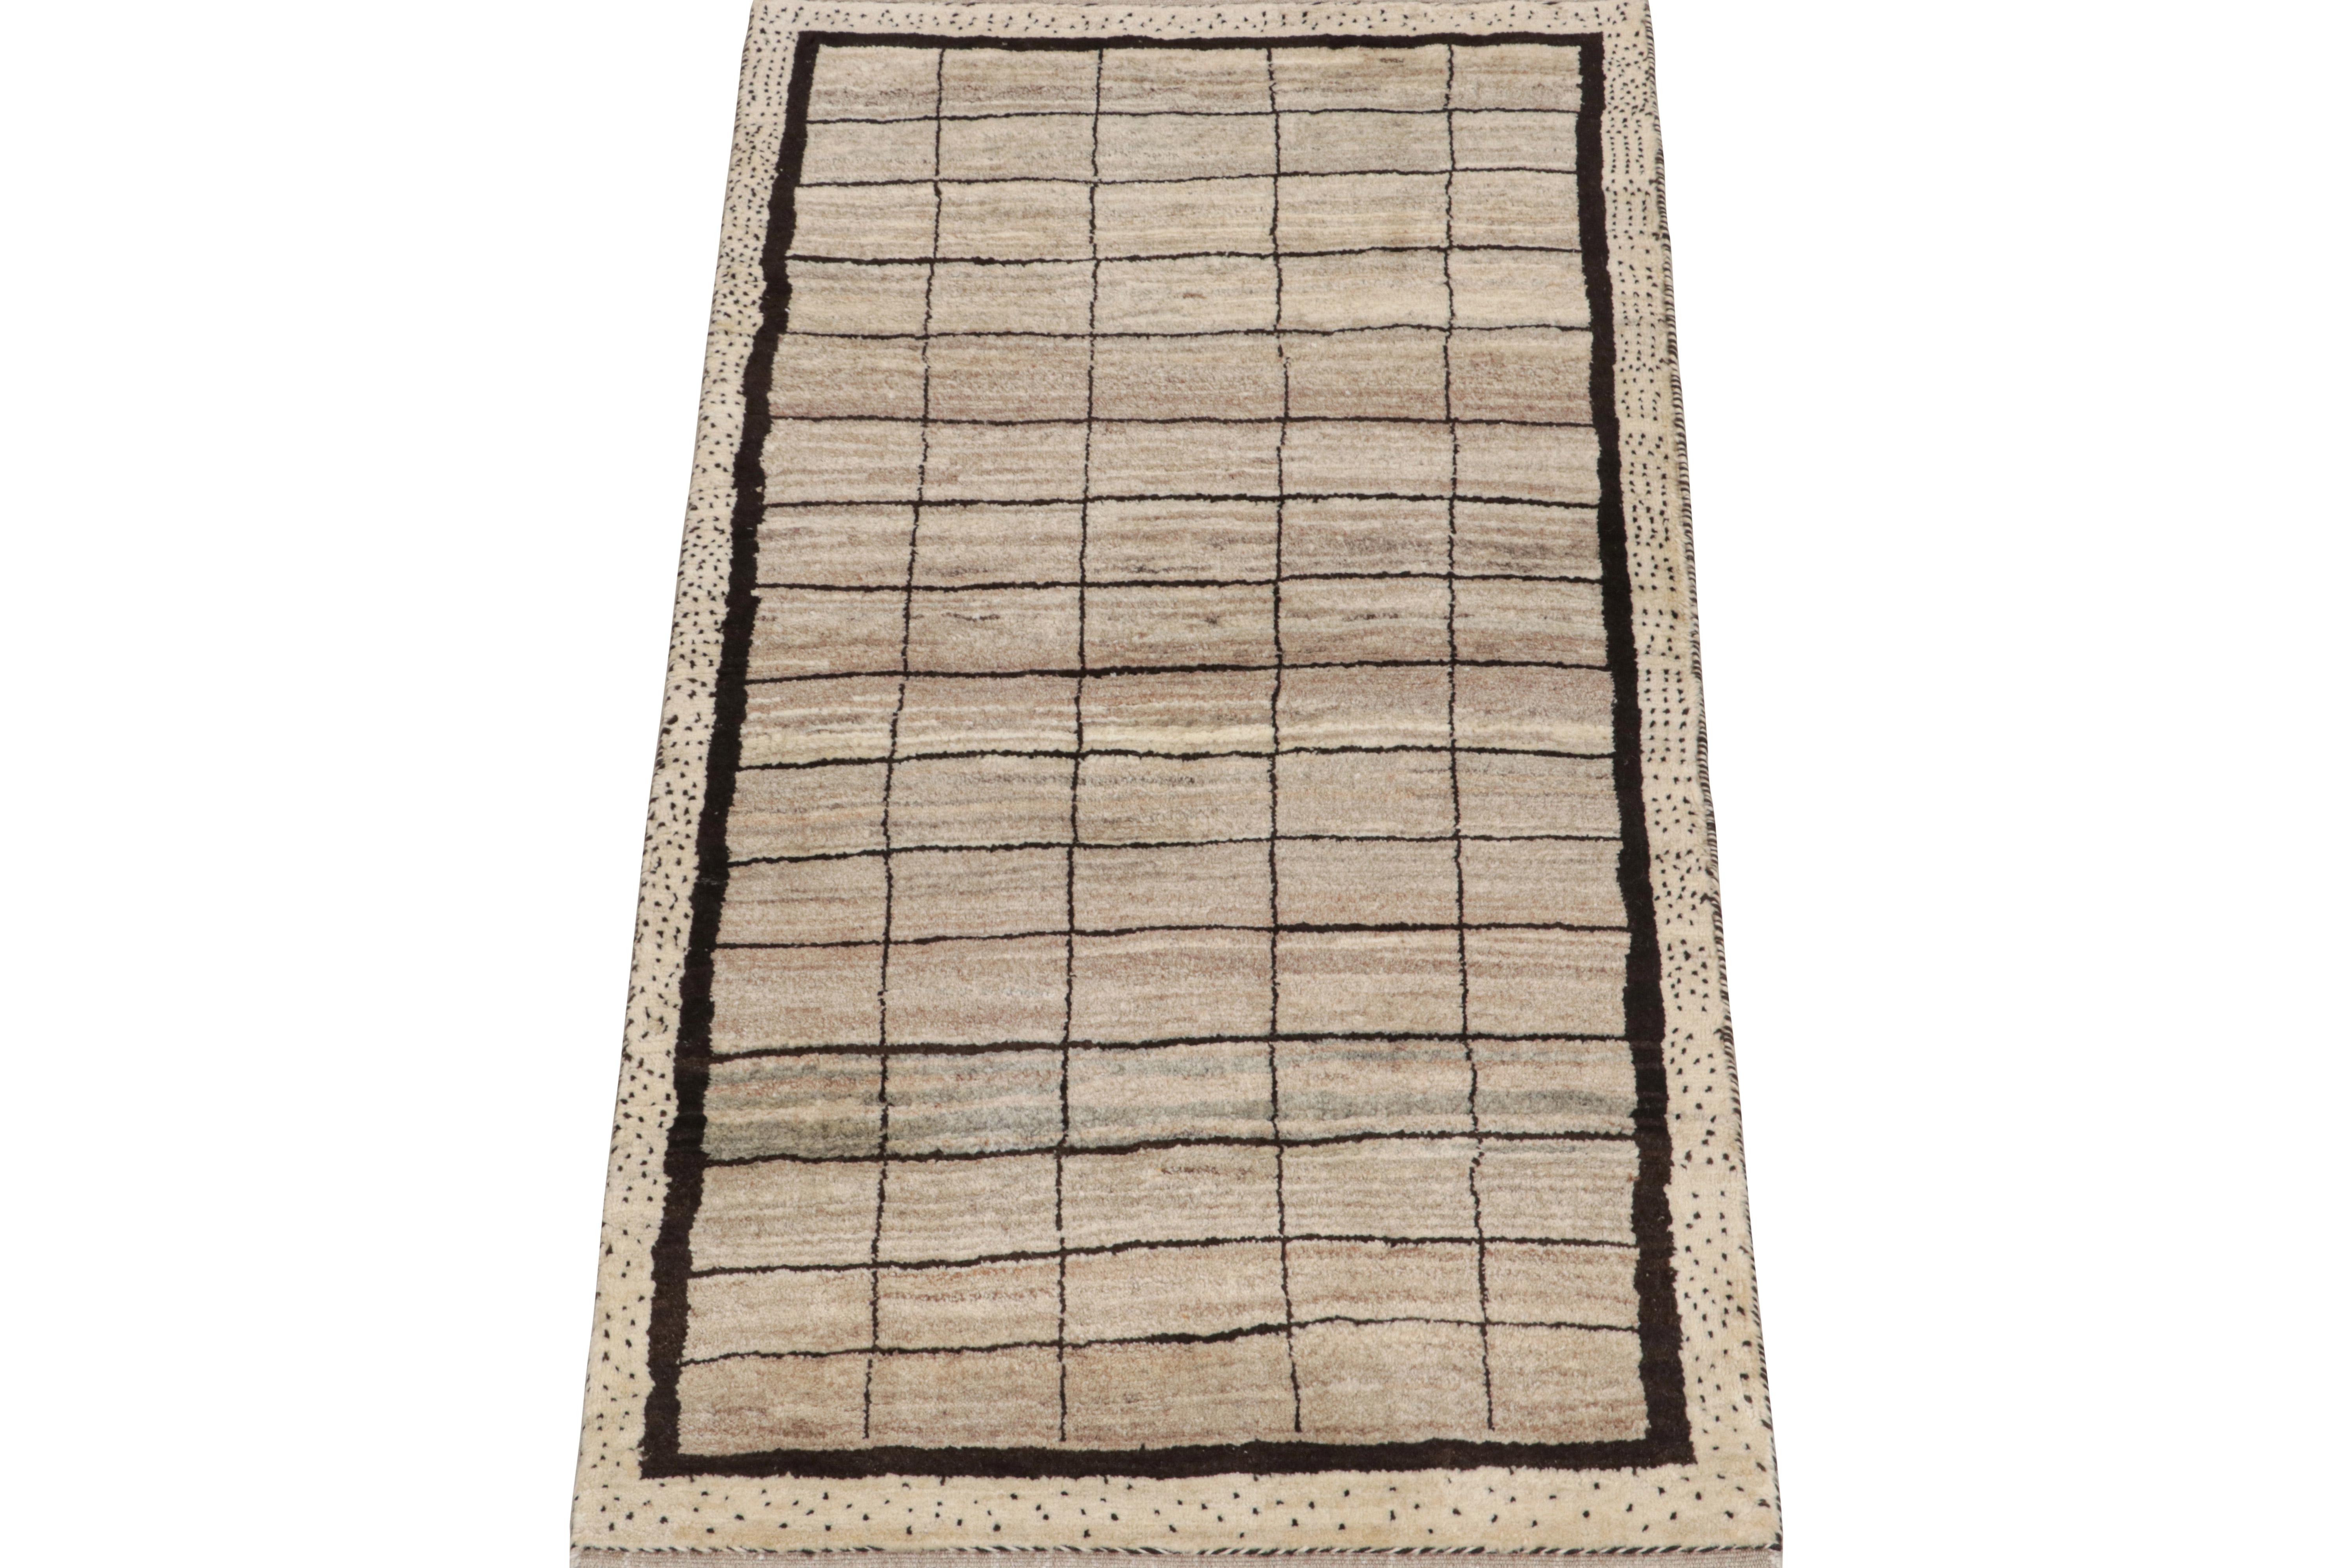 This vintage 2x6 Persian runner is a Gabbeh rug that originates from the Qashqai tribe—hand-knotted in wool circa 1950-1960.

Its geometric pattern enjoys a play of beige and brown in a grid with playful accents therein. Keen eyes will admire the